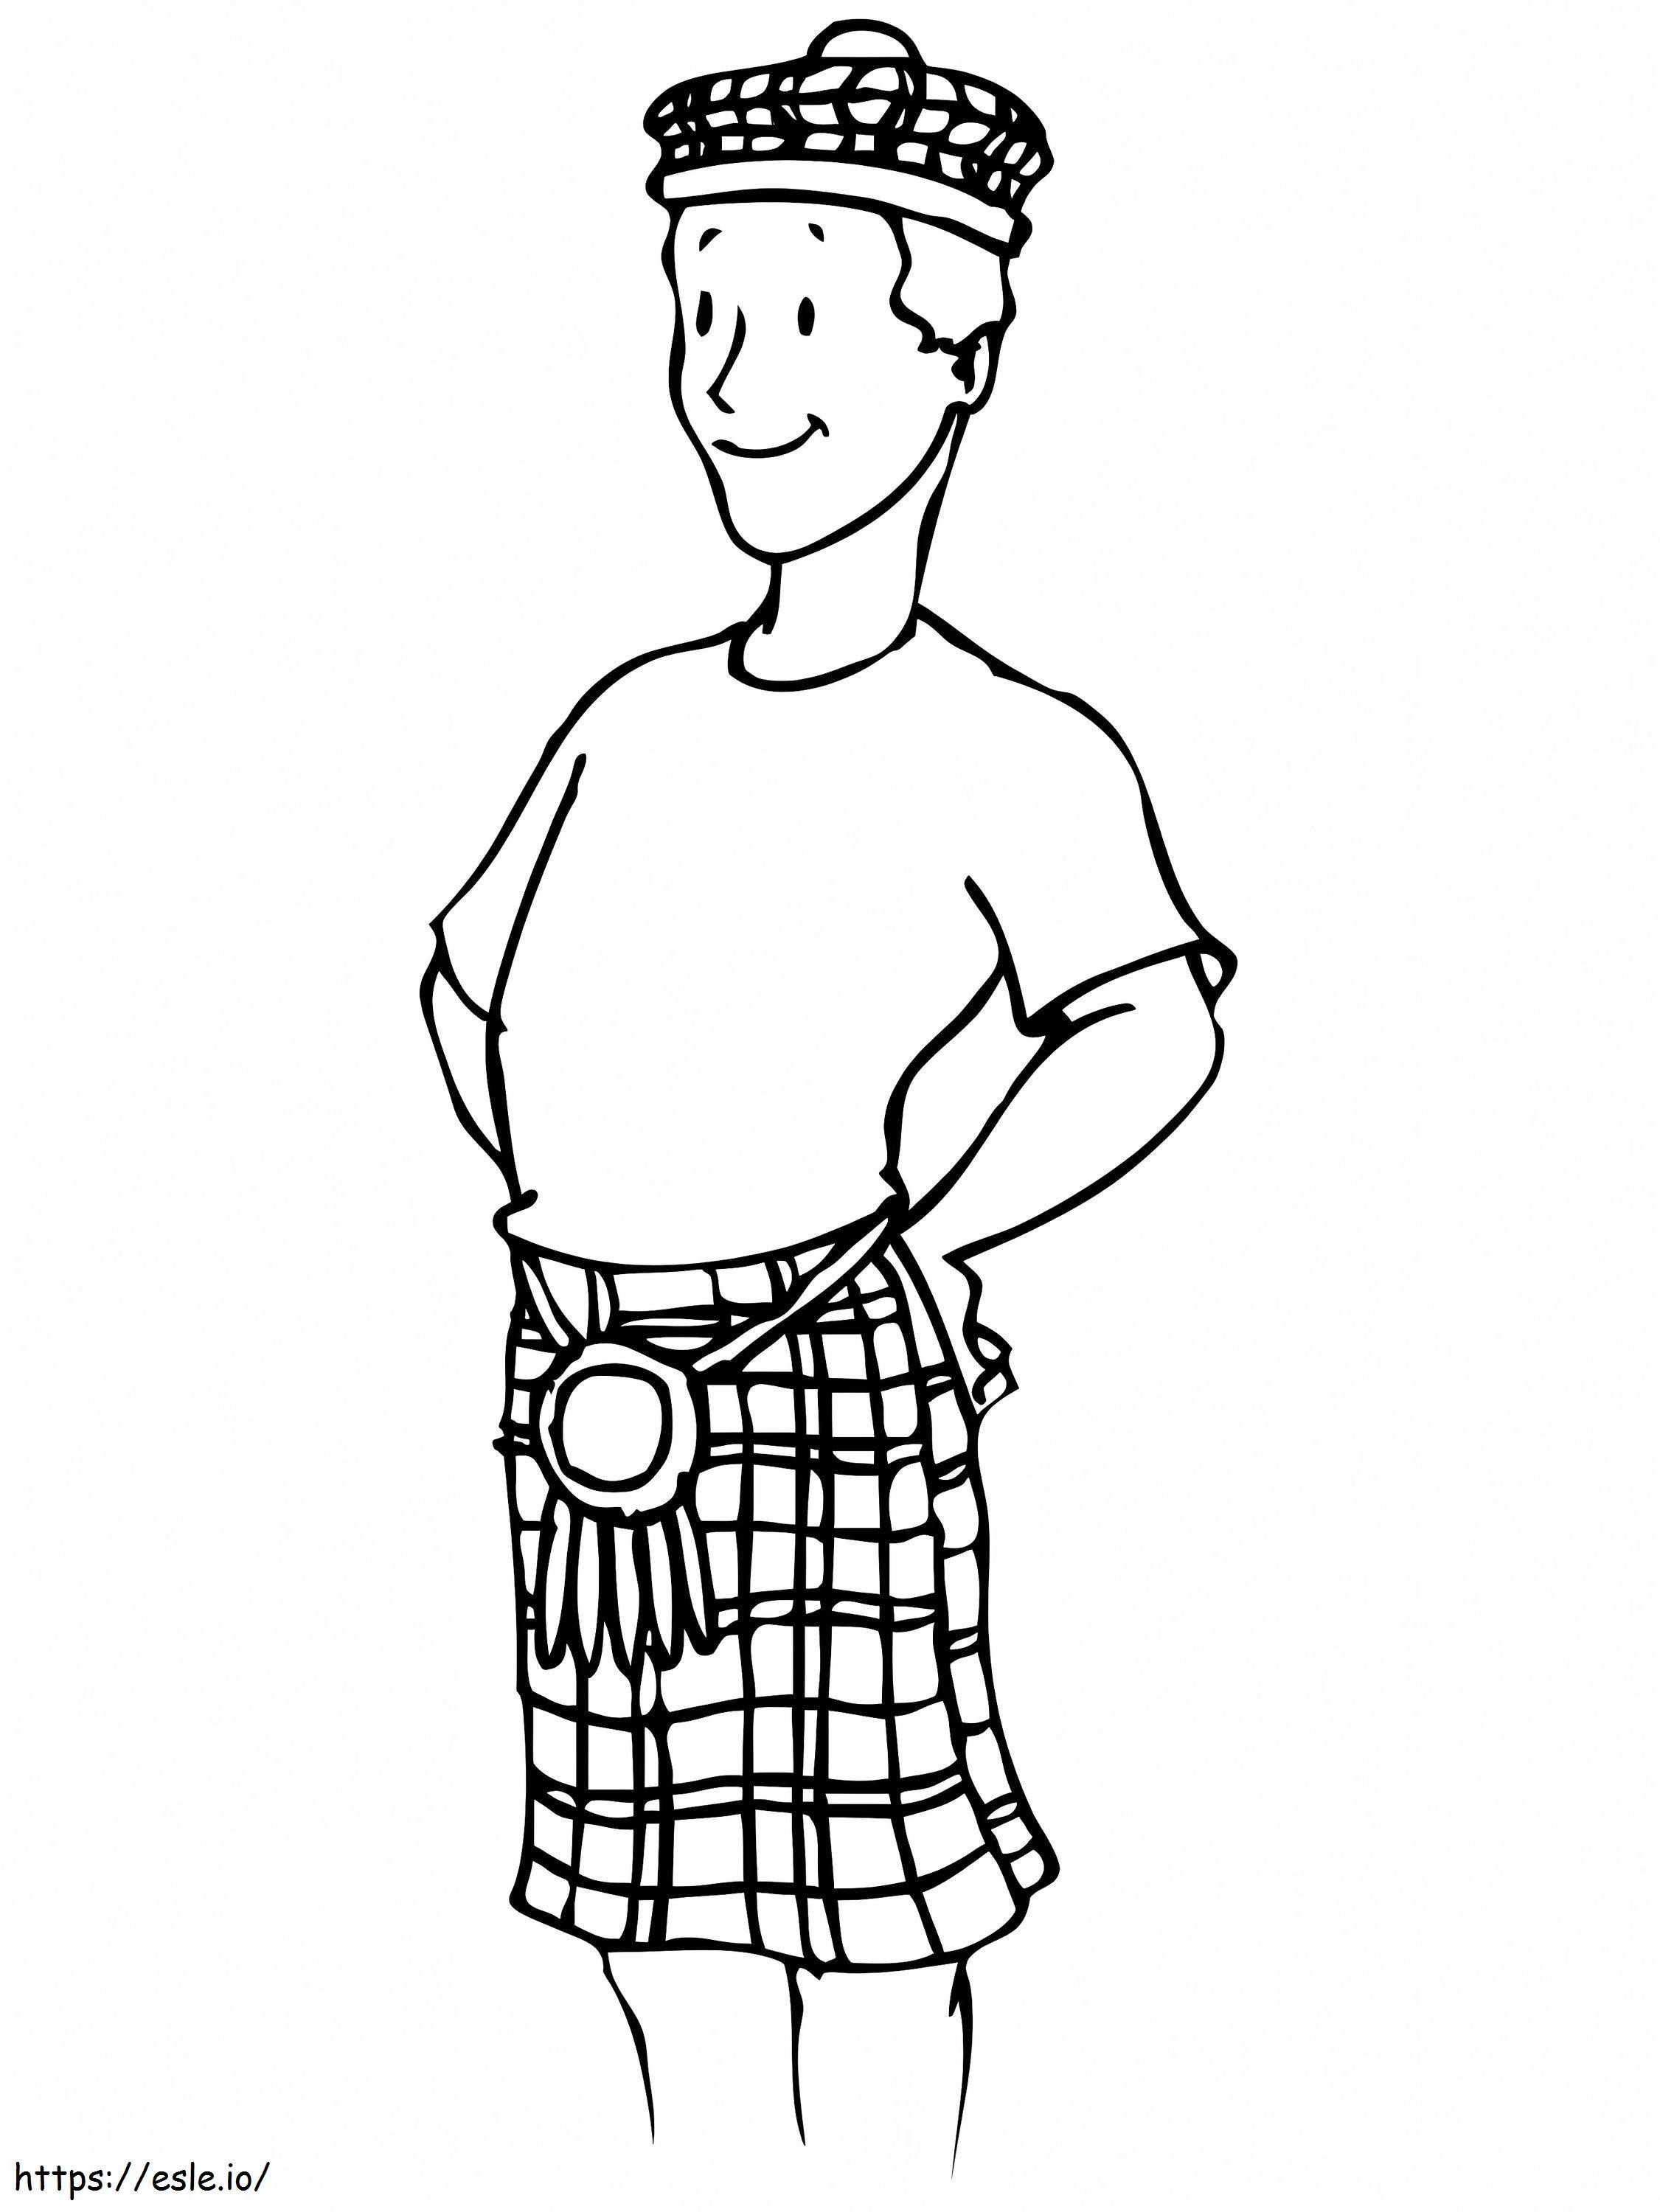 Boy In A Kilt coloring page